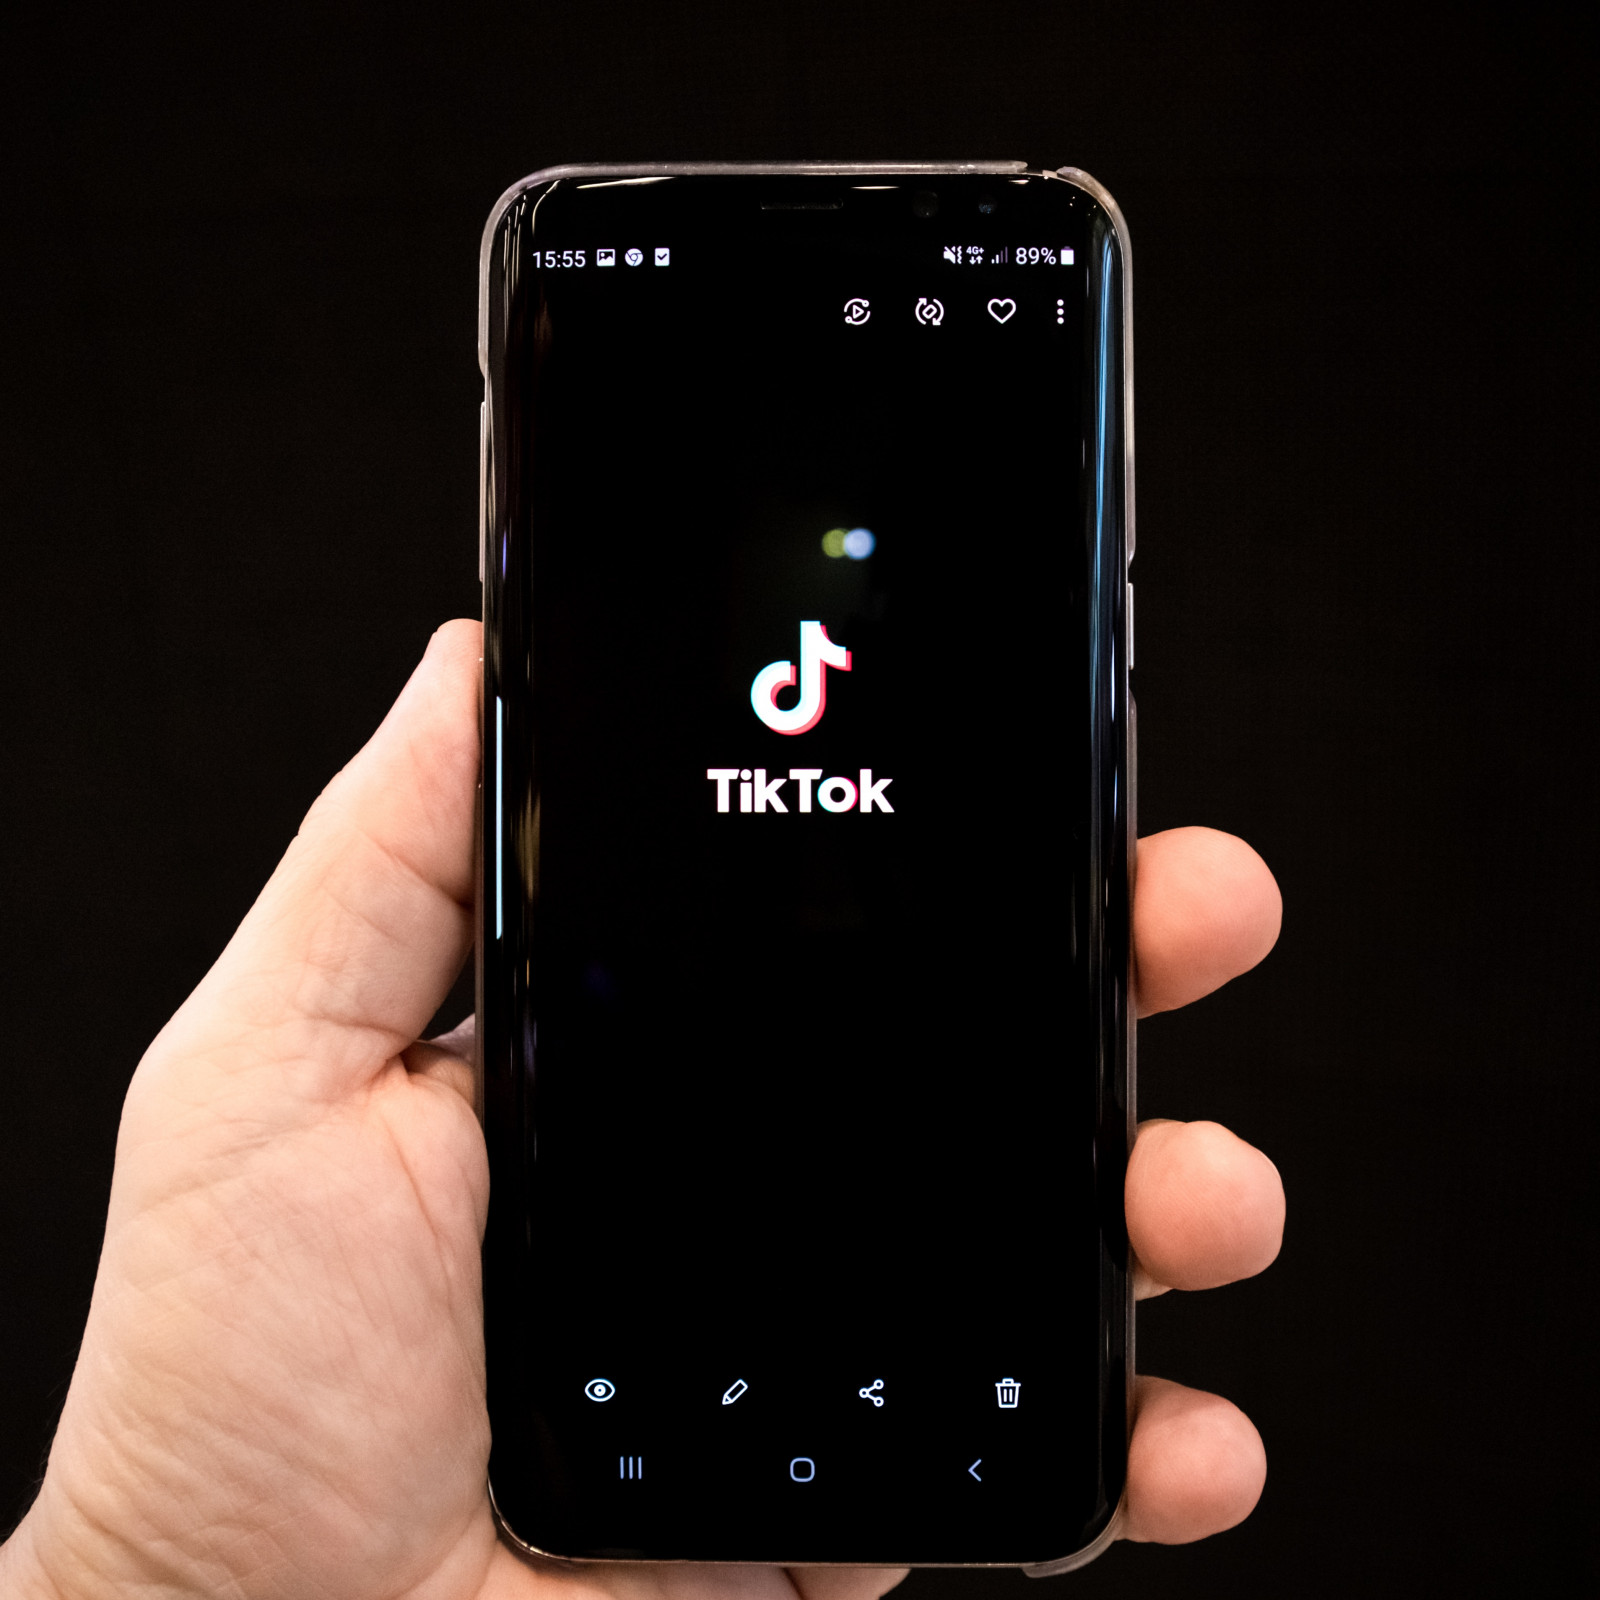 Cover image for Out with viral, in with niche: TikTok’s impact on music changes form